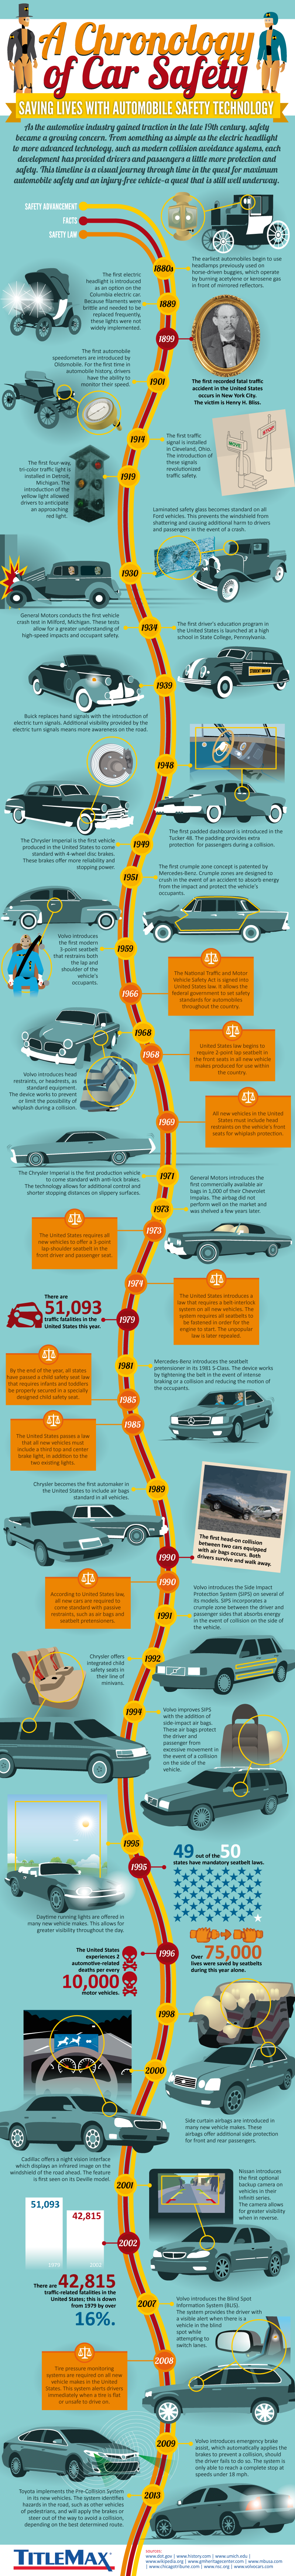 A Chronology of Car Safety